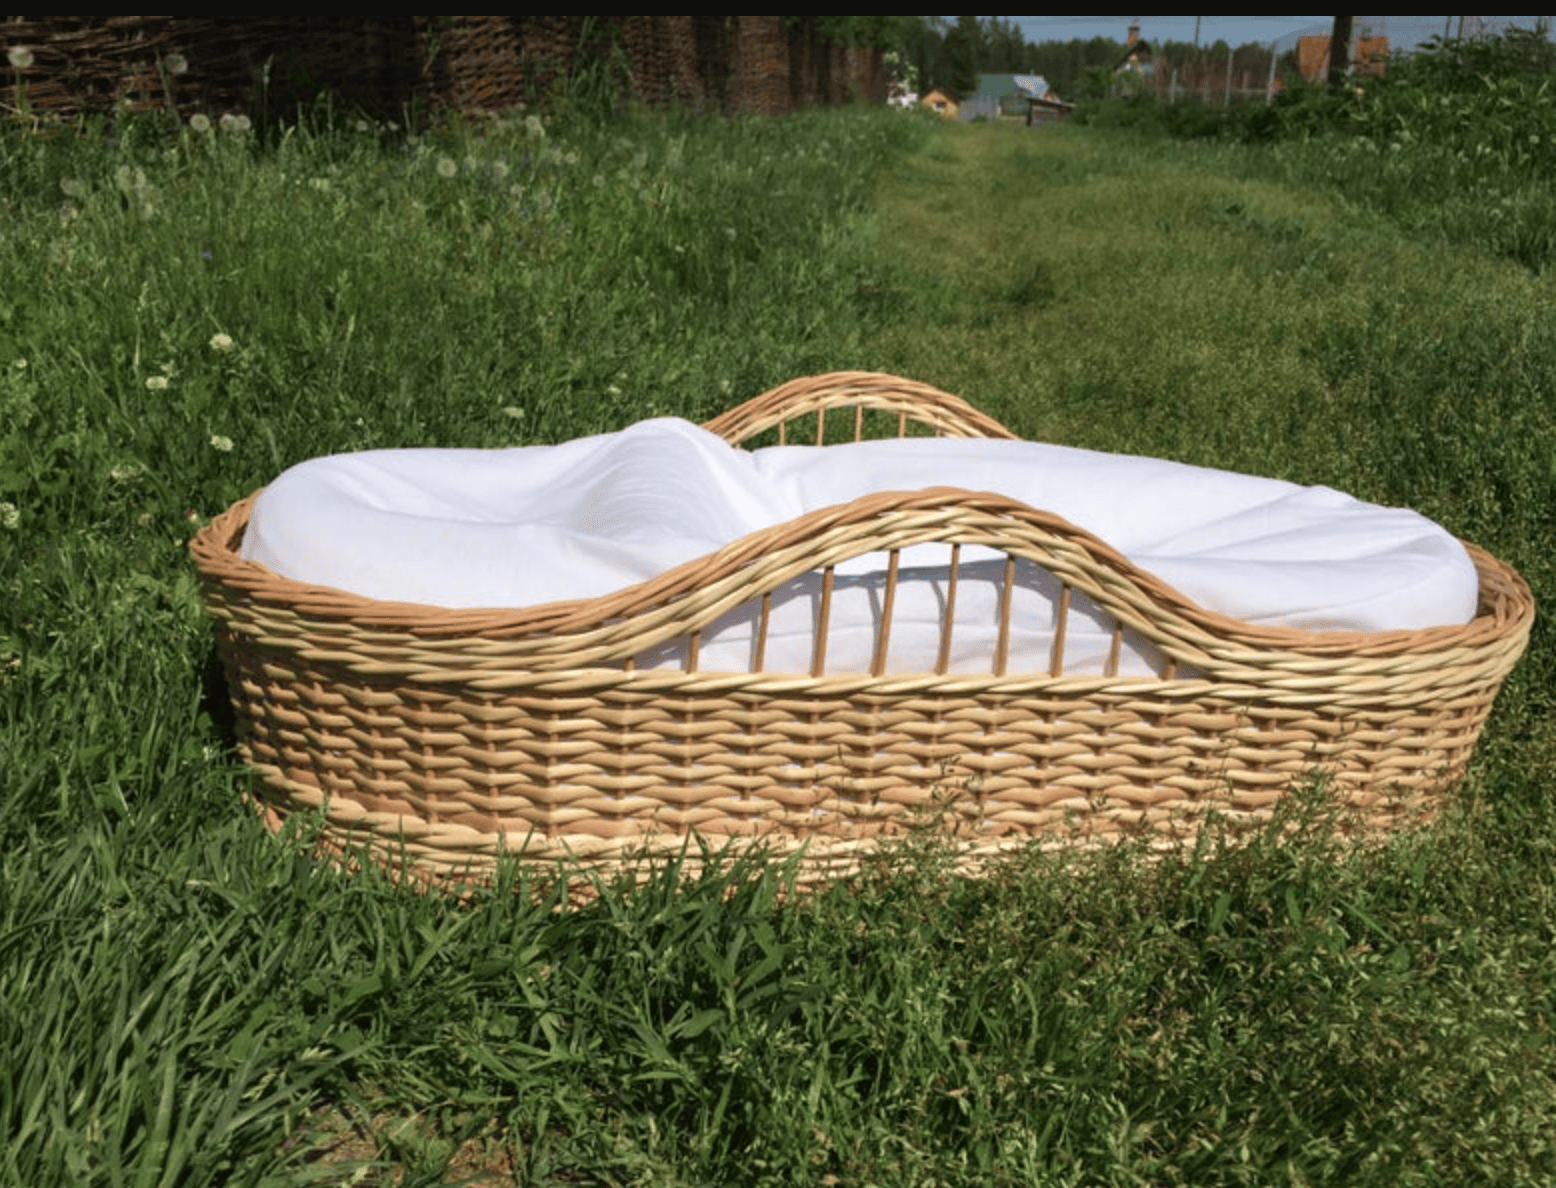 Rattan moses basket in a grassy field